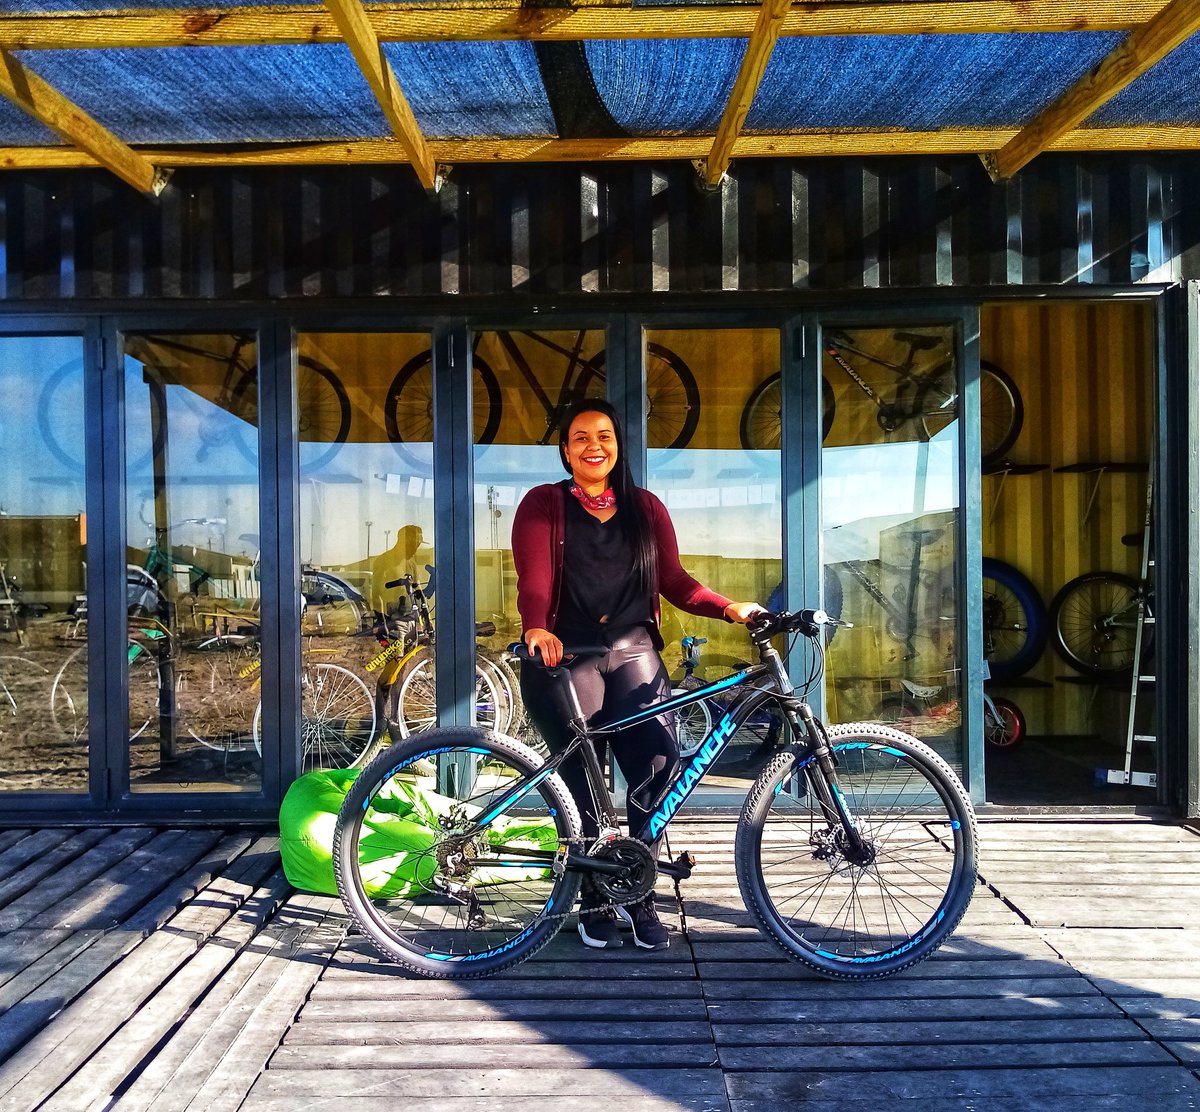 #newbikeday Congrats to Vanessa who bought her new wheels with us 😁🚲🚲🚲 wishing you many happy kilometers and awesome experiences.

#welovebikes #pushandpedal #KhaltshaCycles #avalanche #since1992 #feeltheearthmove #newstore #cycling #newbikeday